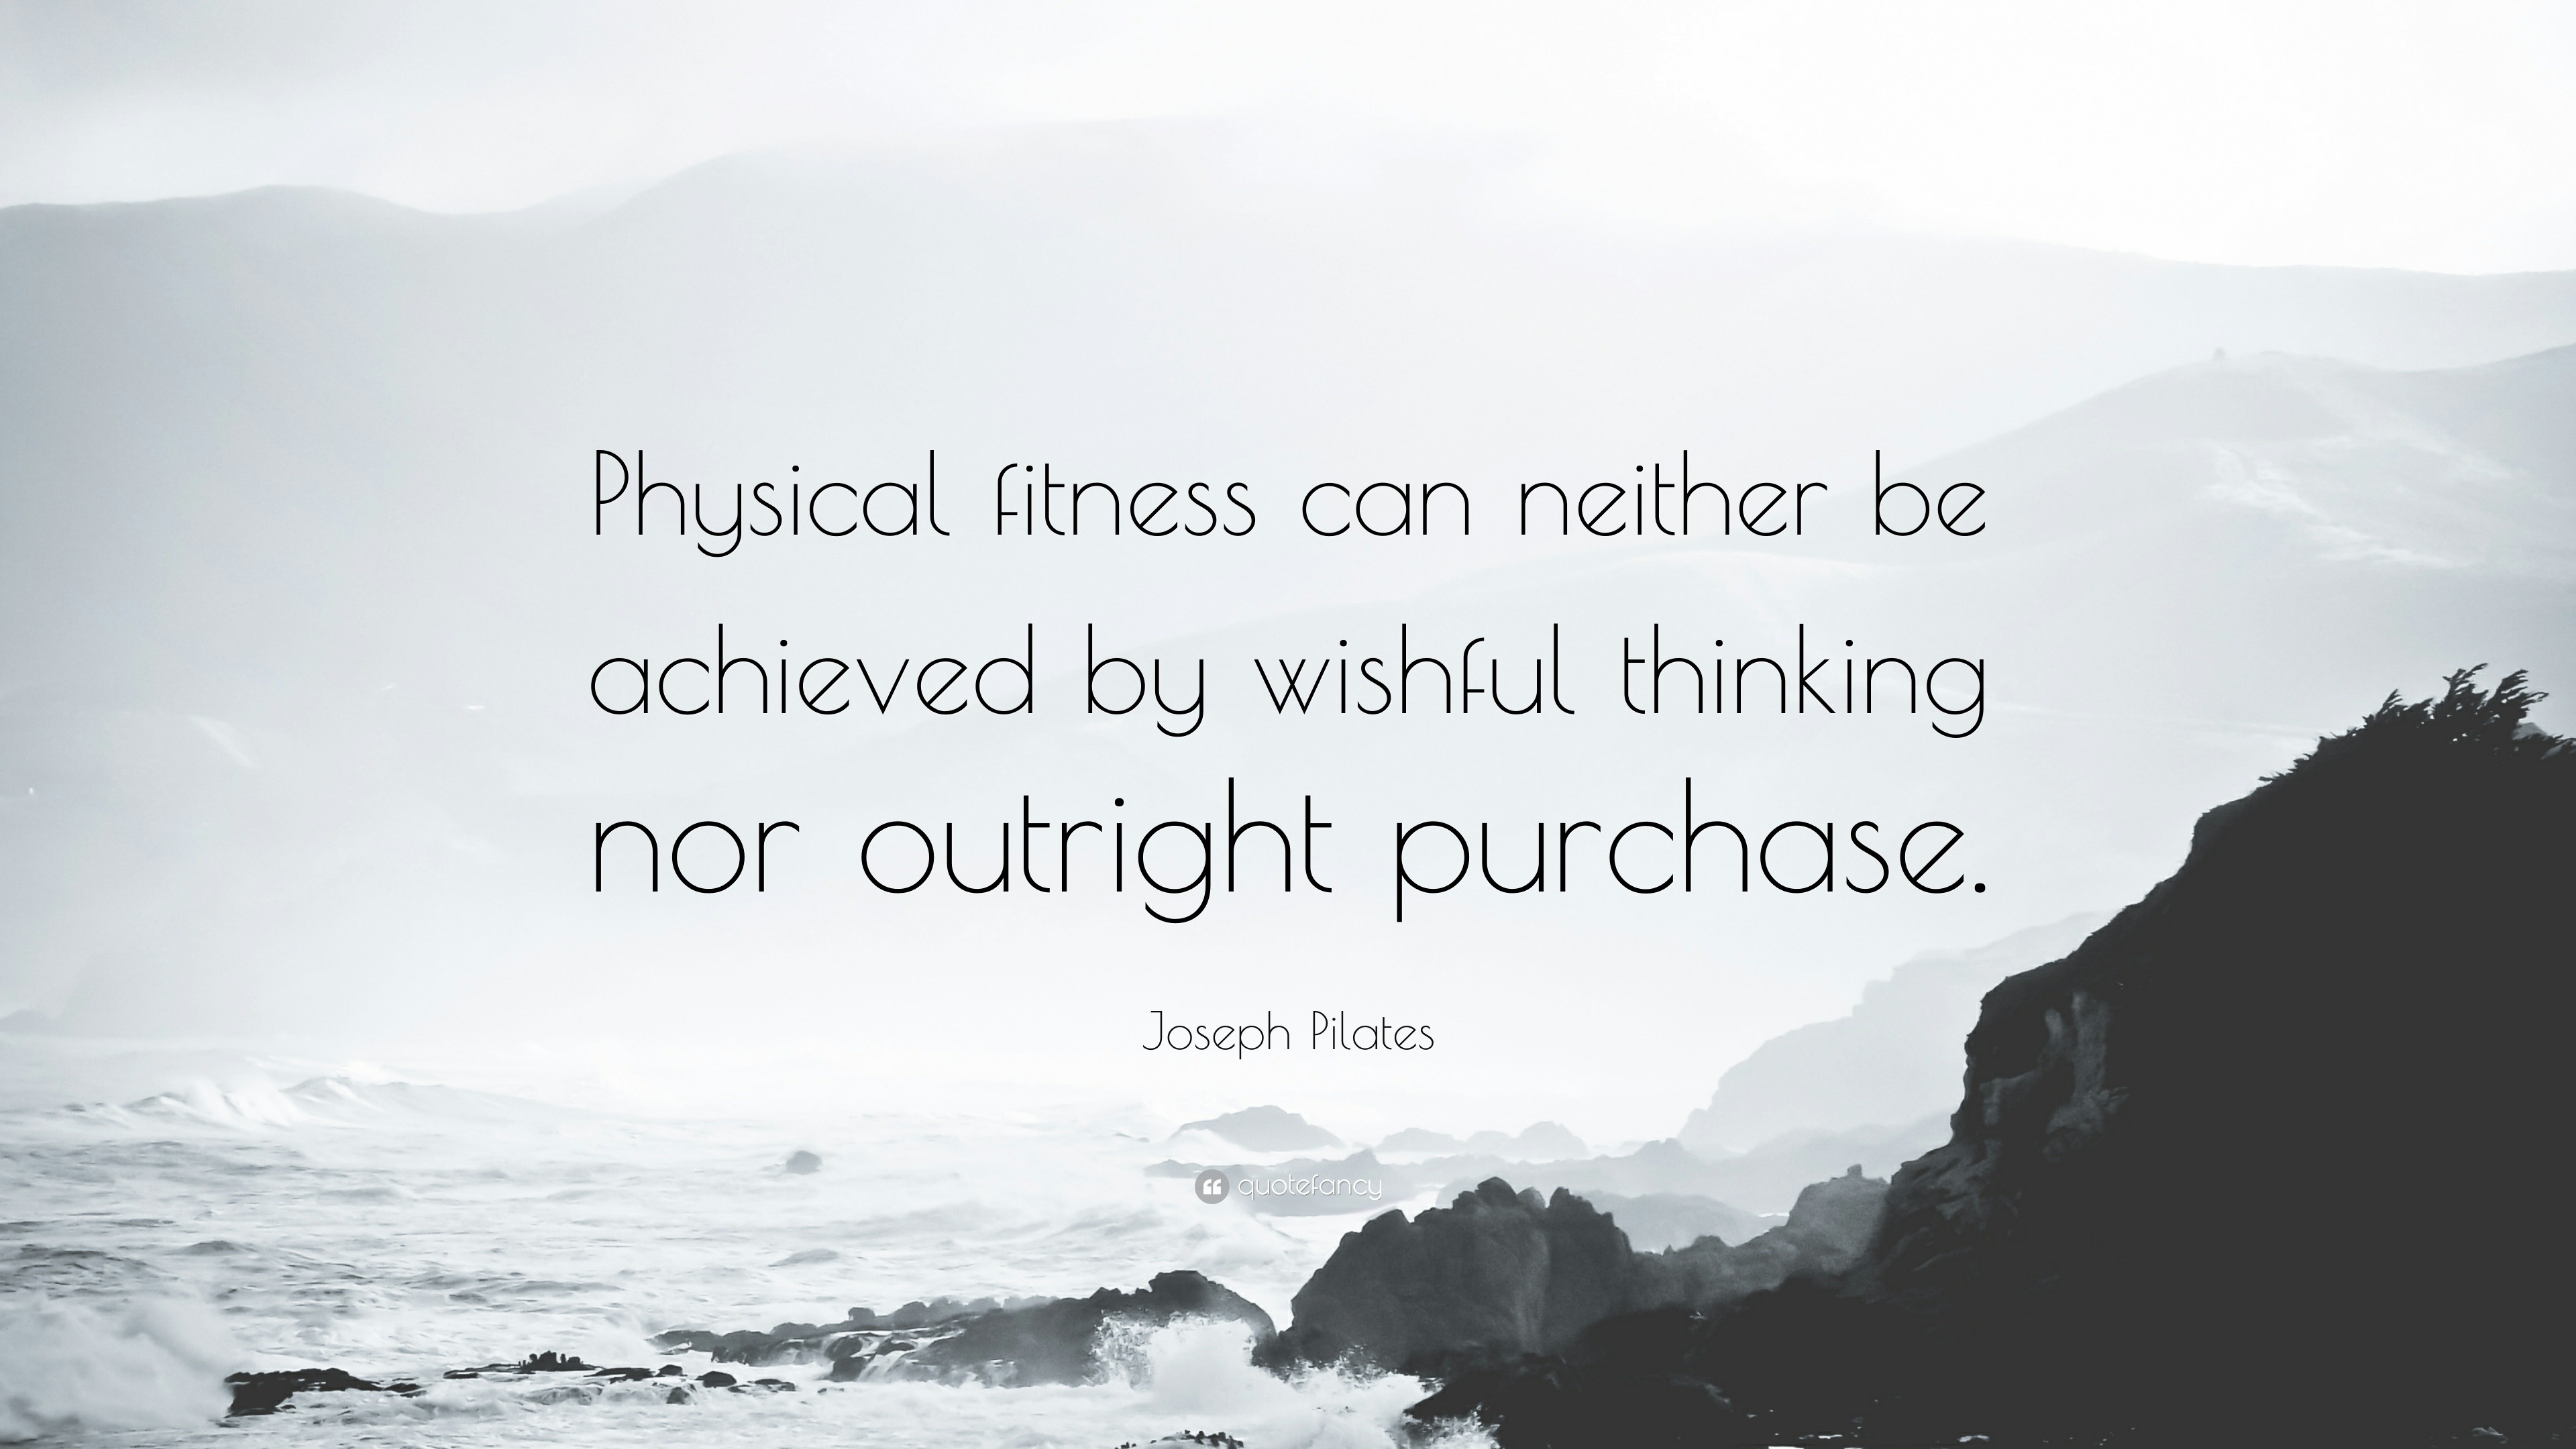 22 Pilates Quotes to Inspire Your Next Workout